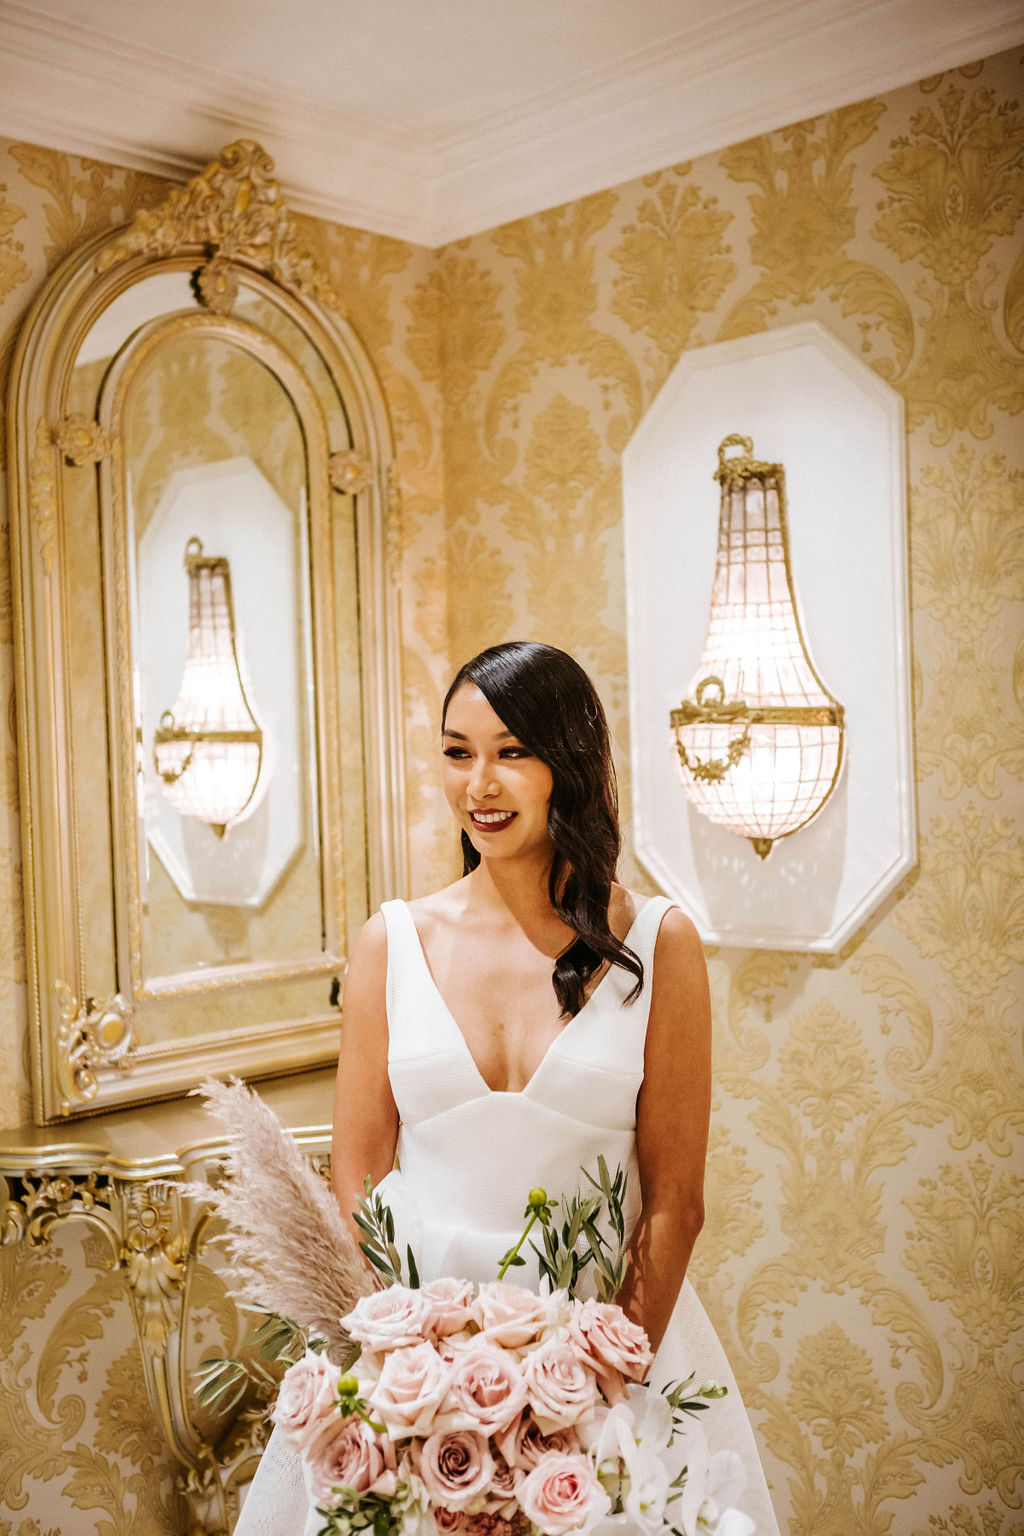 KWH bride Win wears the Bespoke wedding dress, Aisha, with pink roses for bridal bouquet.